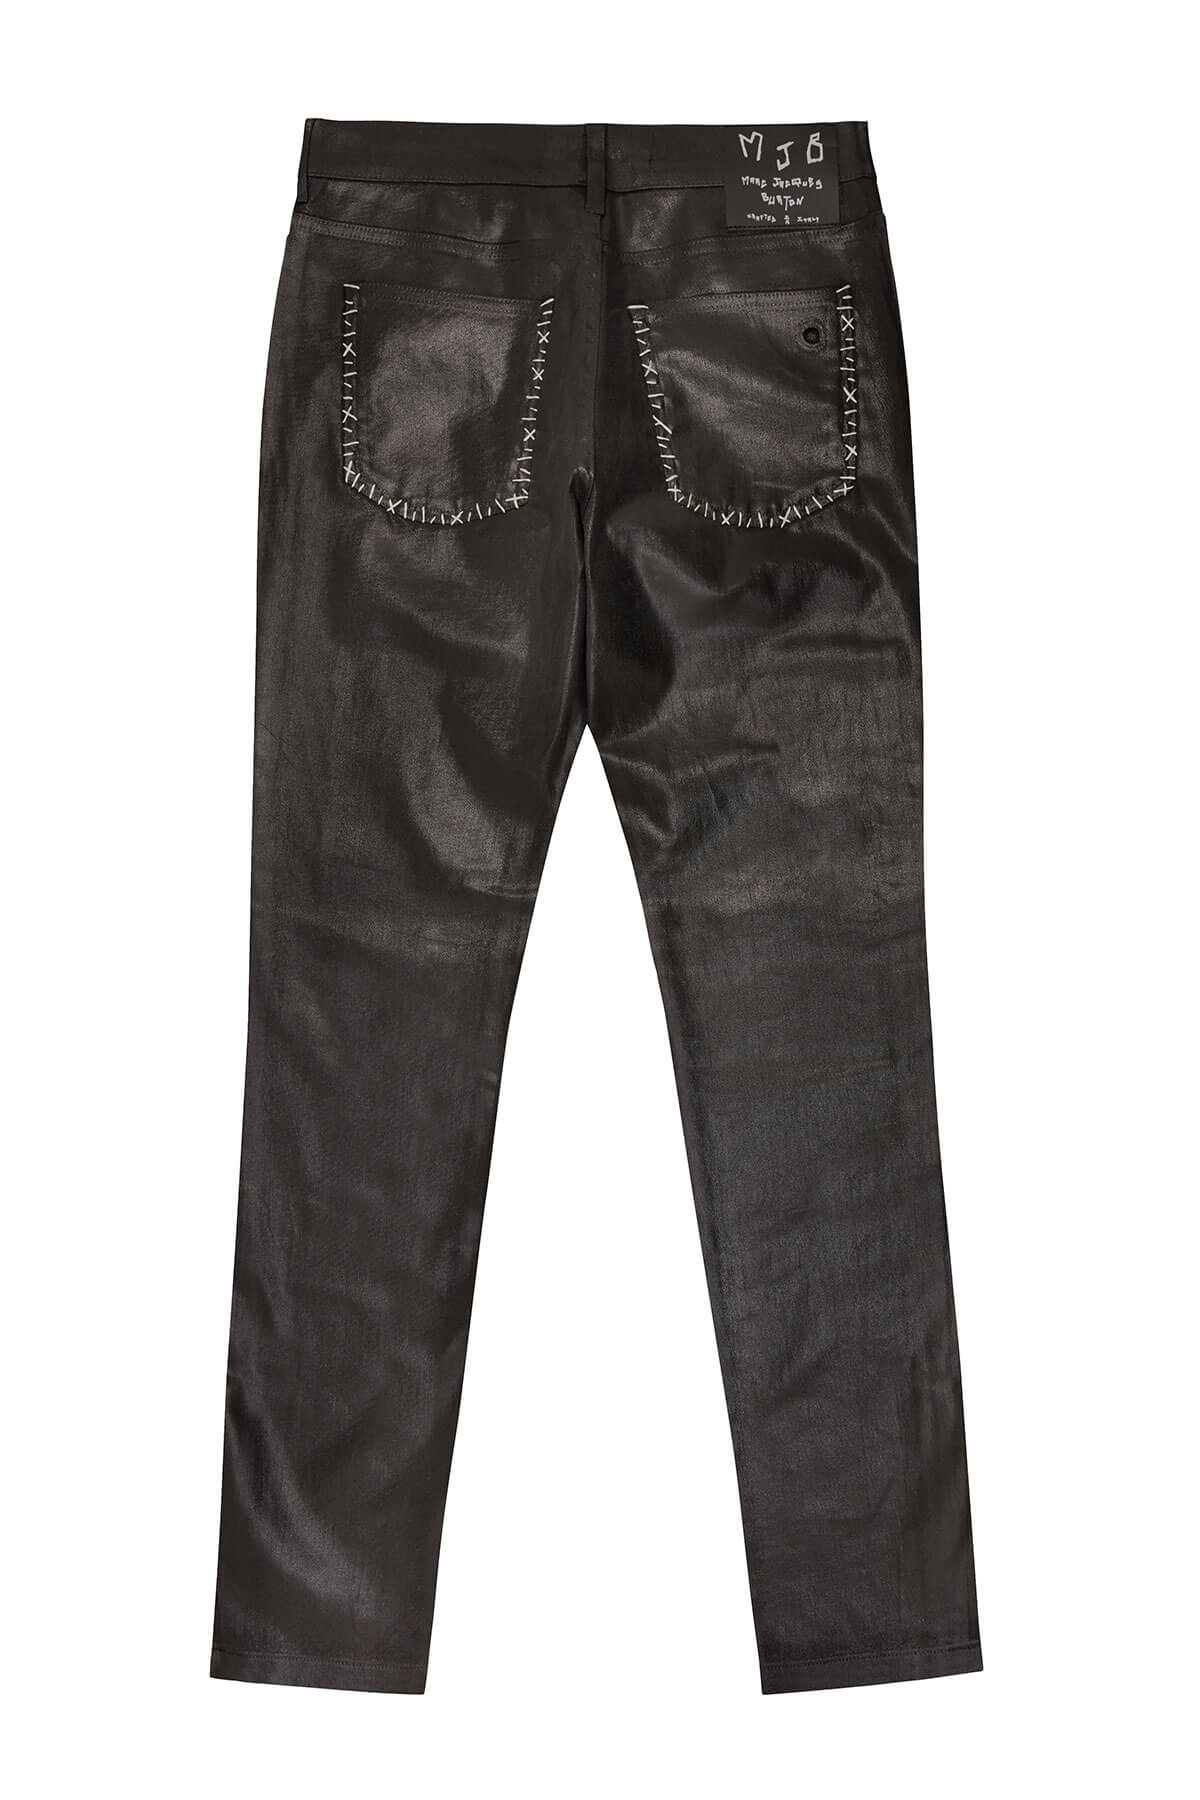 OIL WAXED CRIXUS JEANS